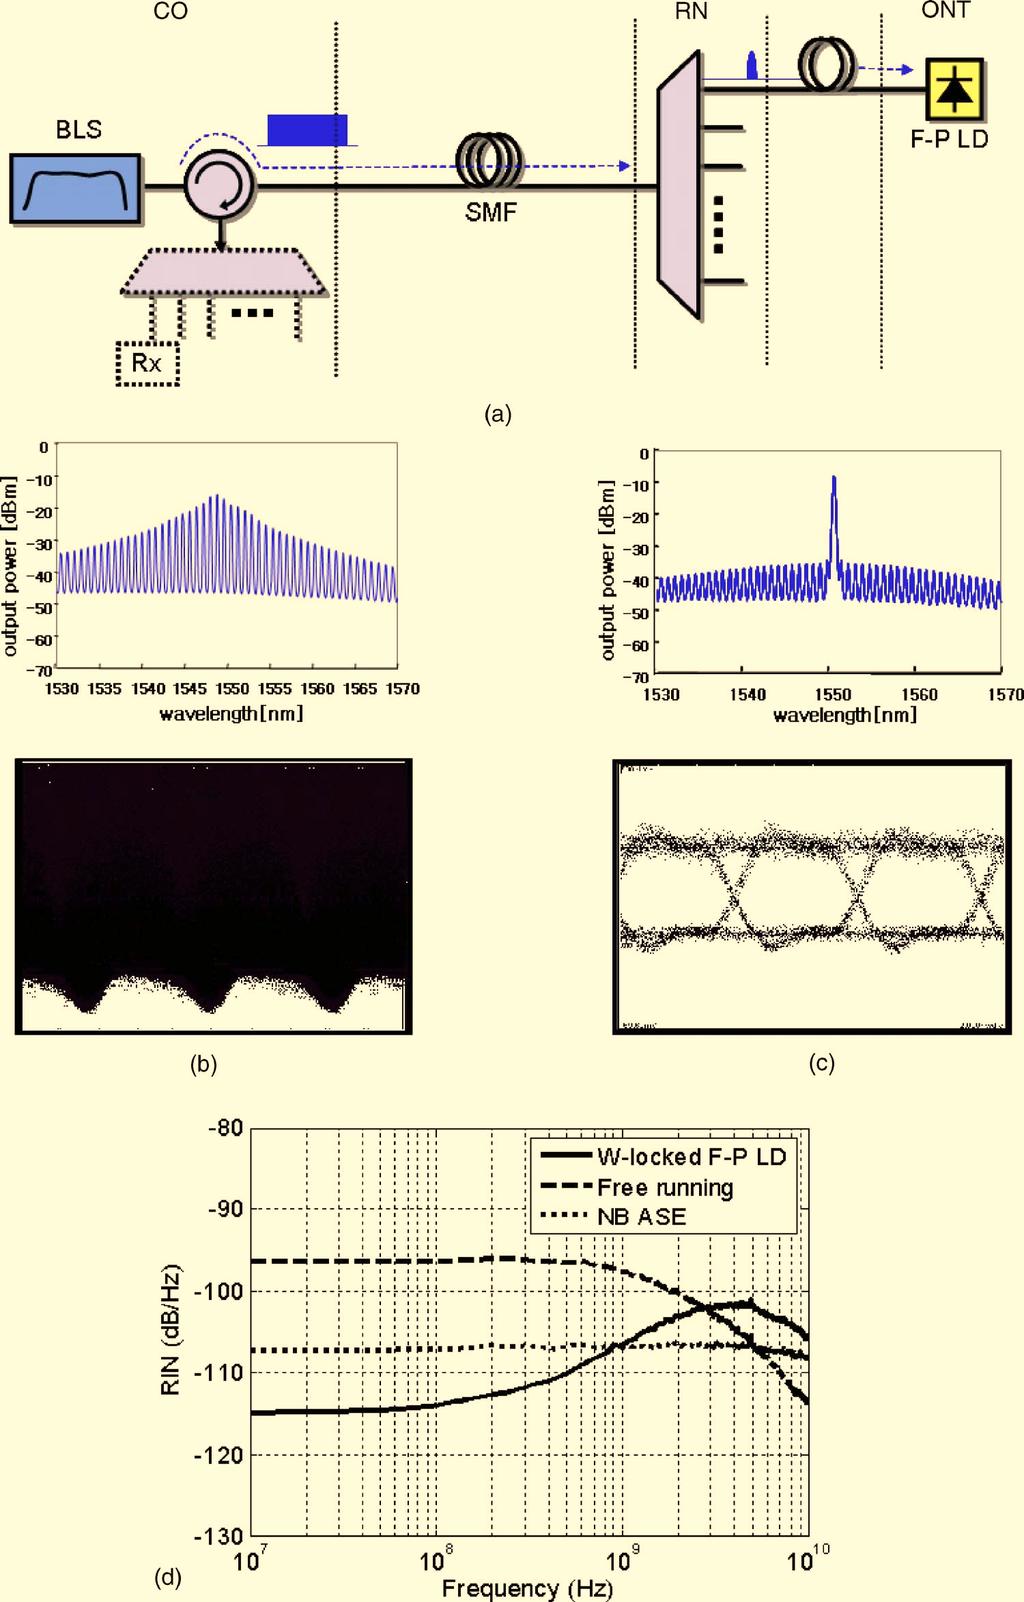 Vol. 6, No. 5 / May 2007 / JOURNAL OF OPTICAL NETWORKING 455 Fig. 3.